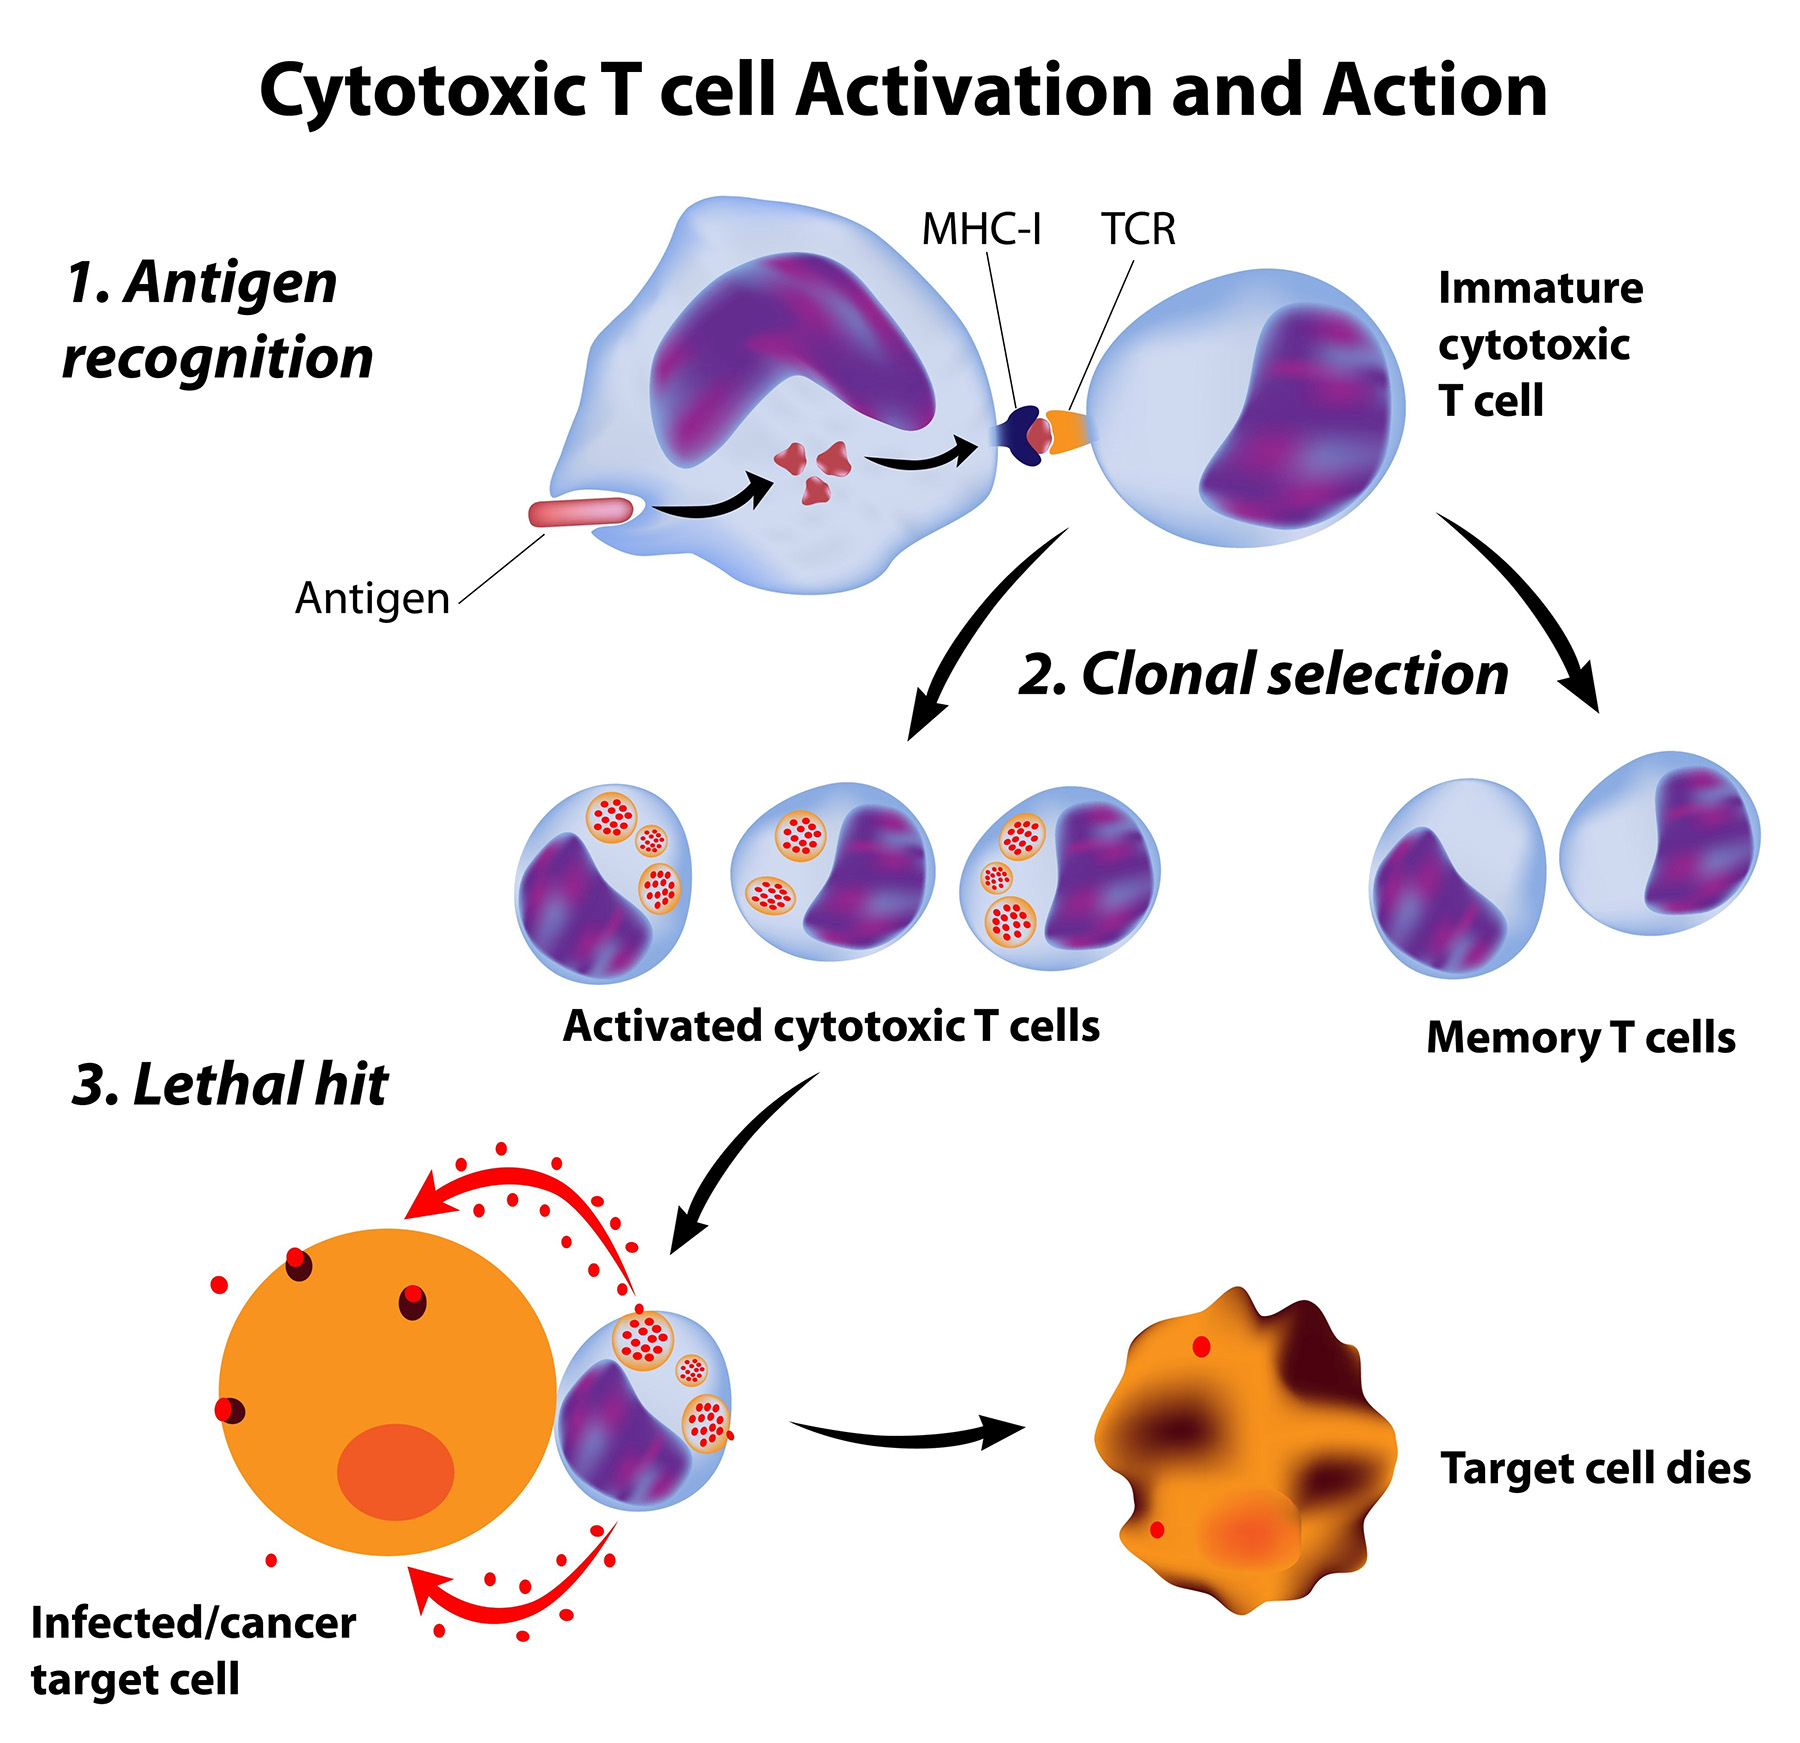 Cytotoxic T cell Activation and Action